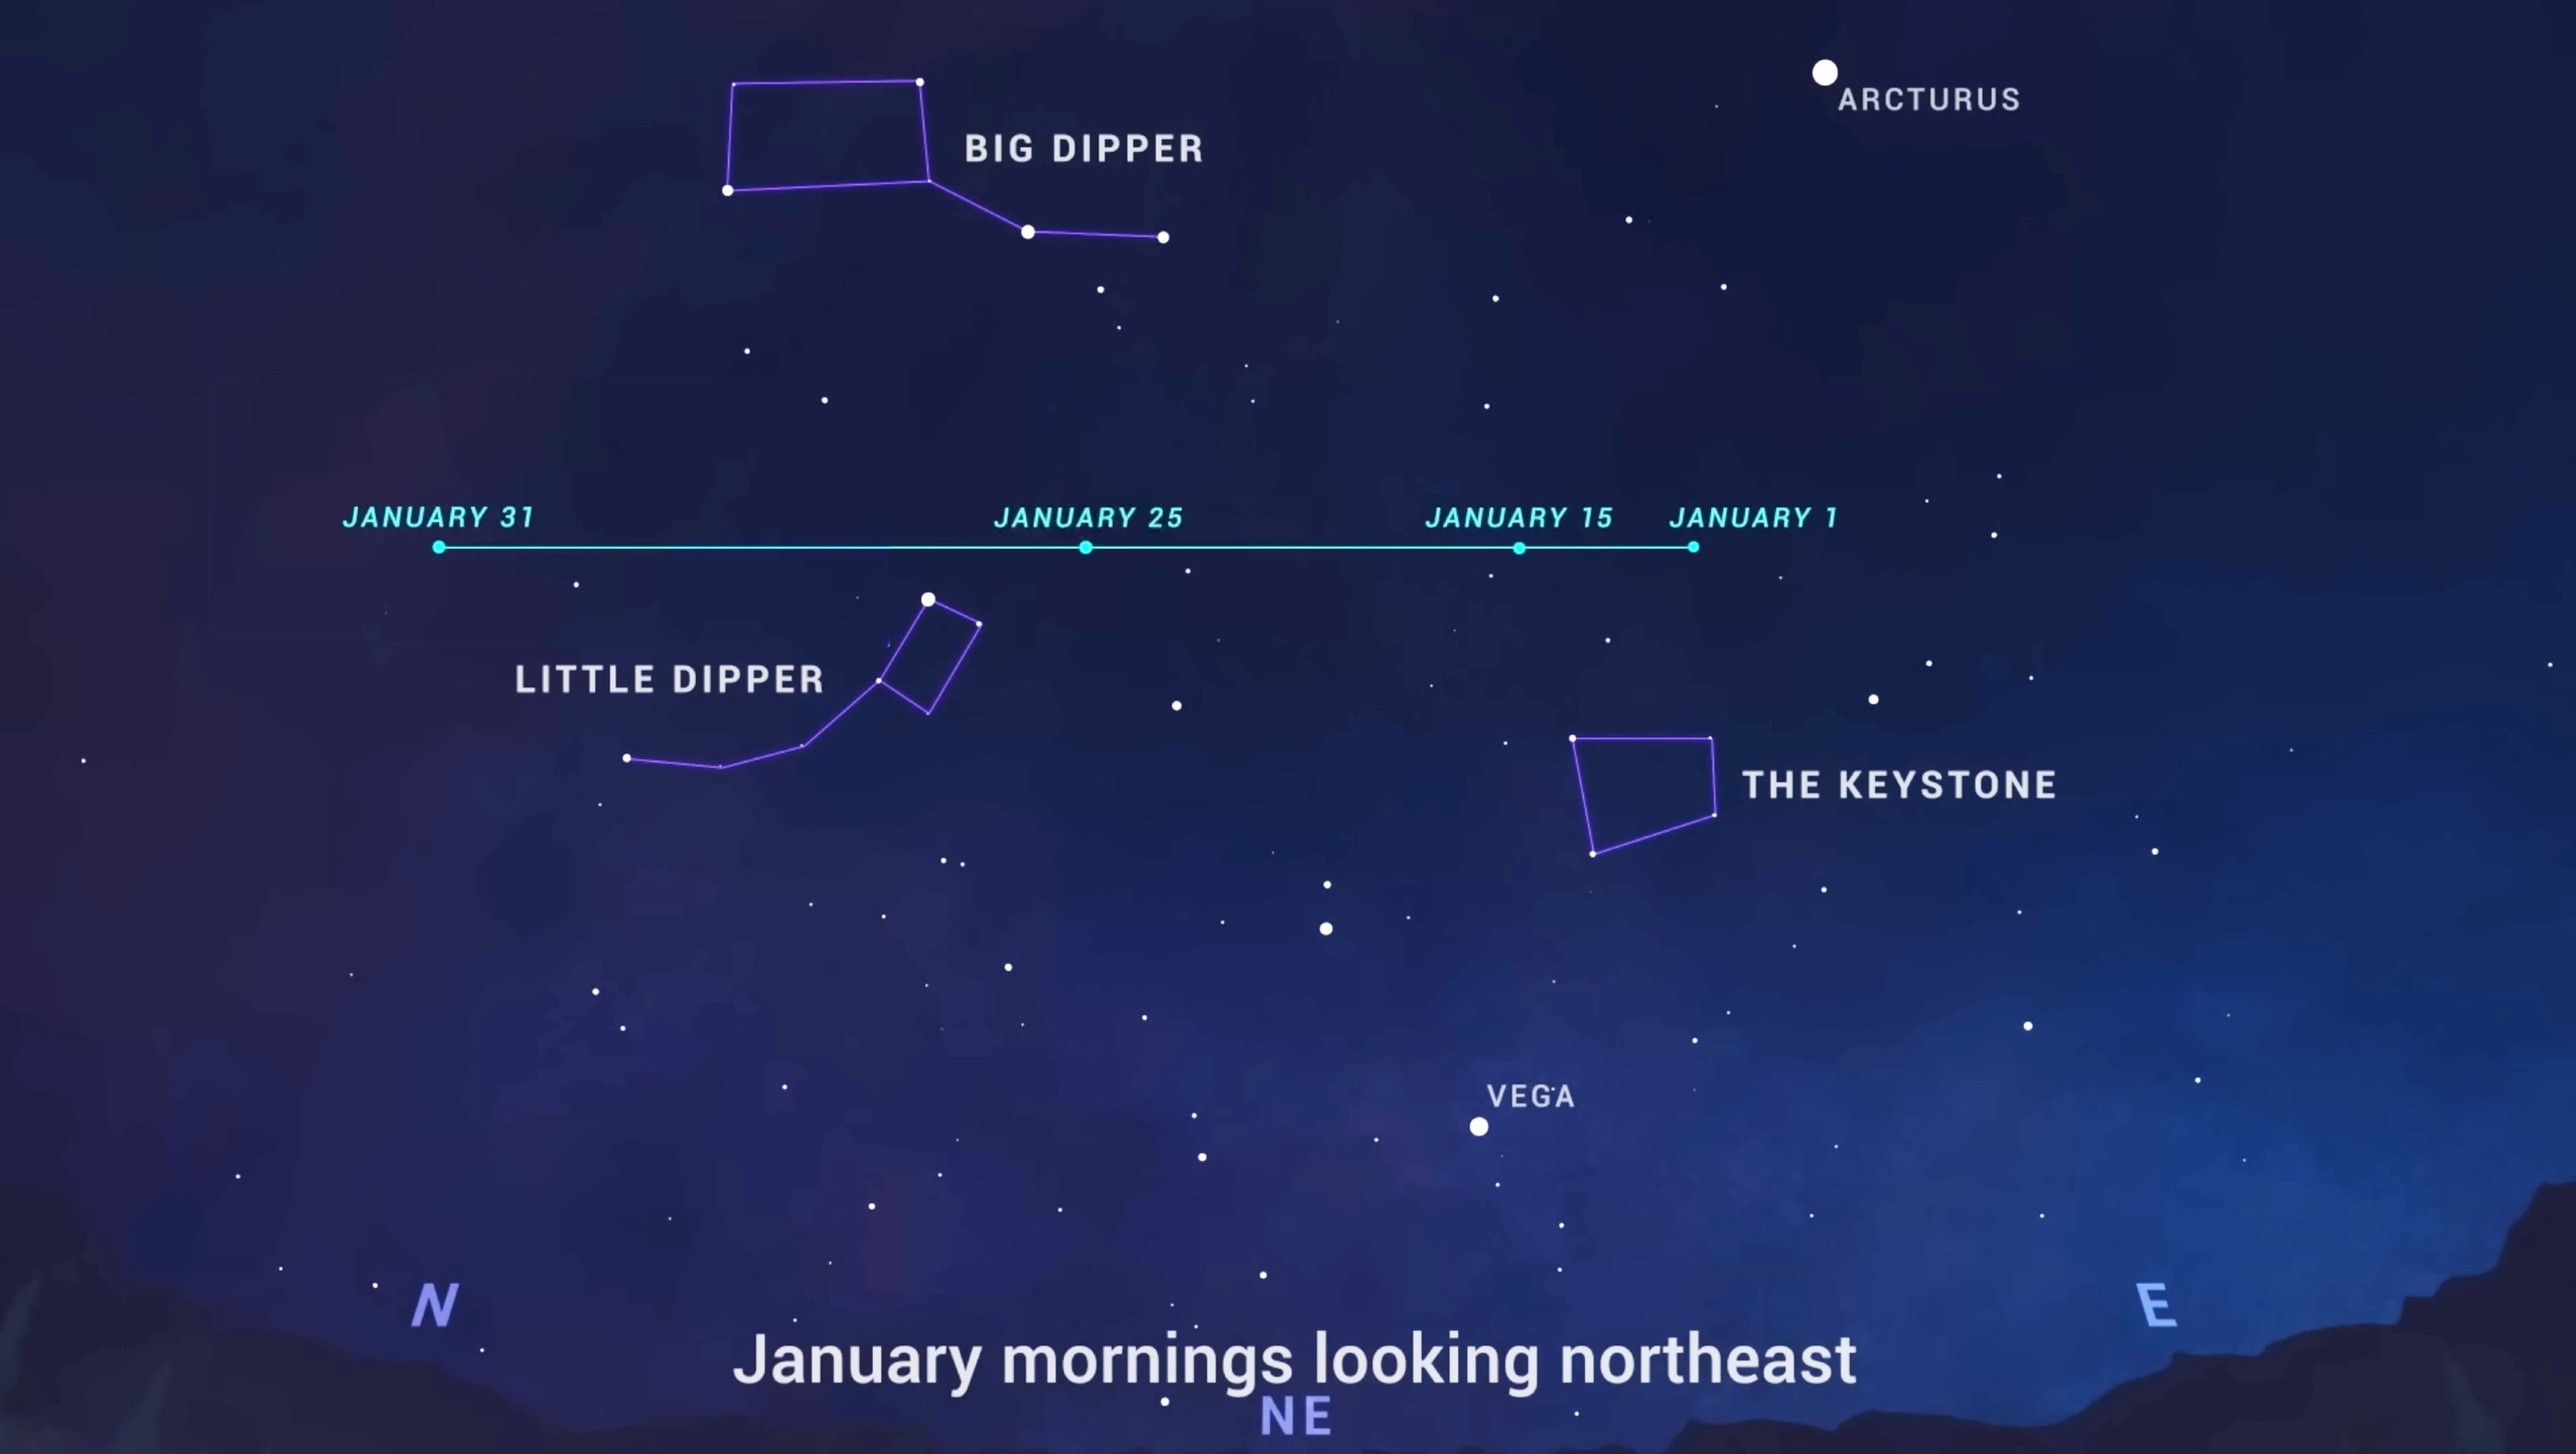 NASA image showing the path of Comet C/2022 E3 ZTF in January skies in the northern hemisphere.